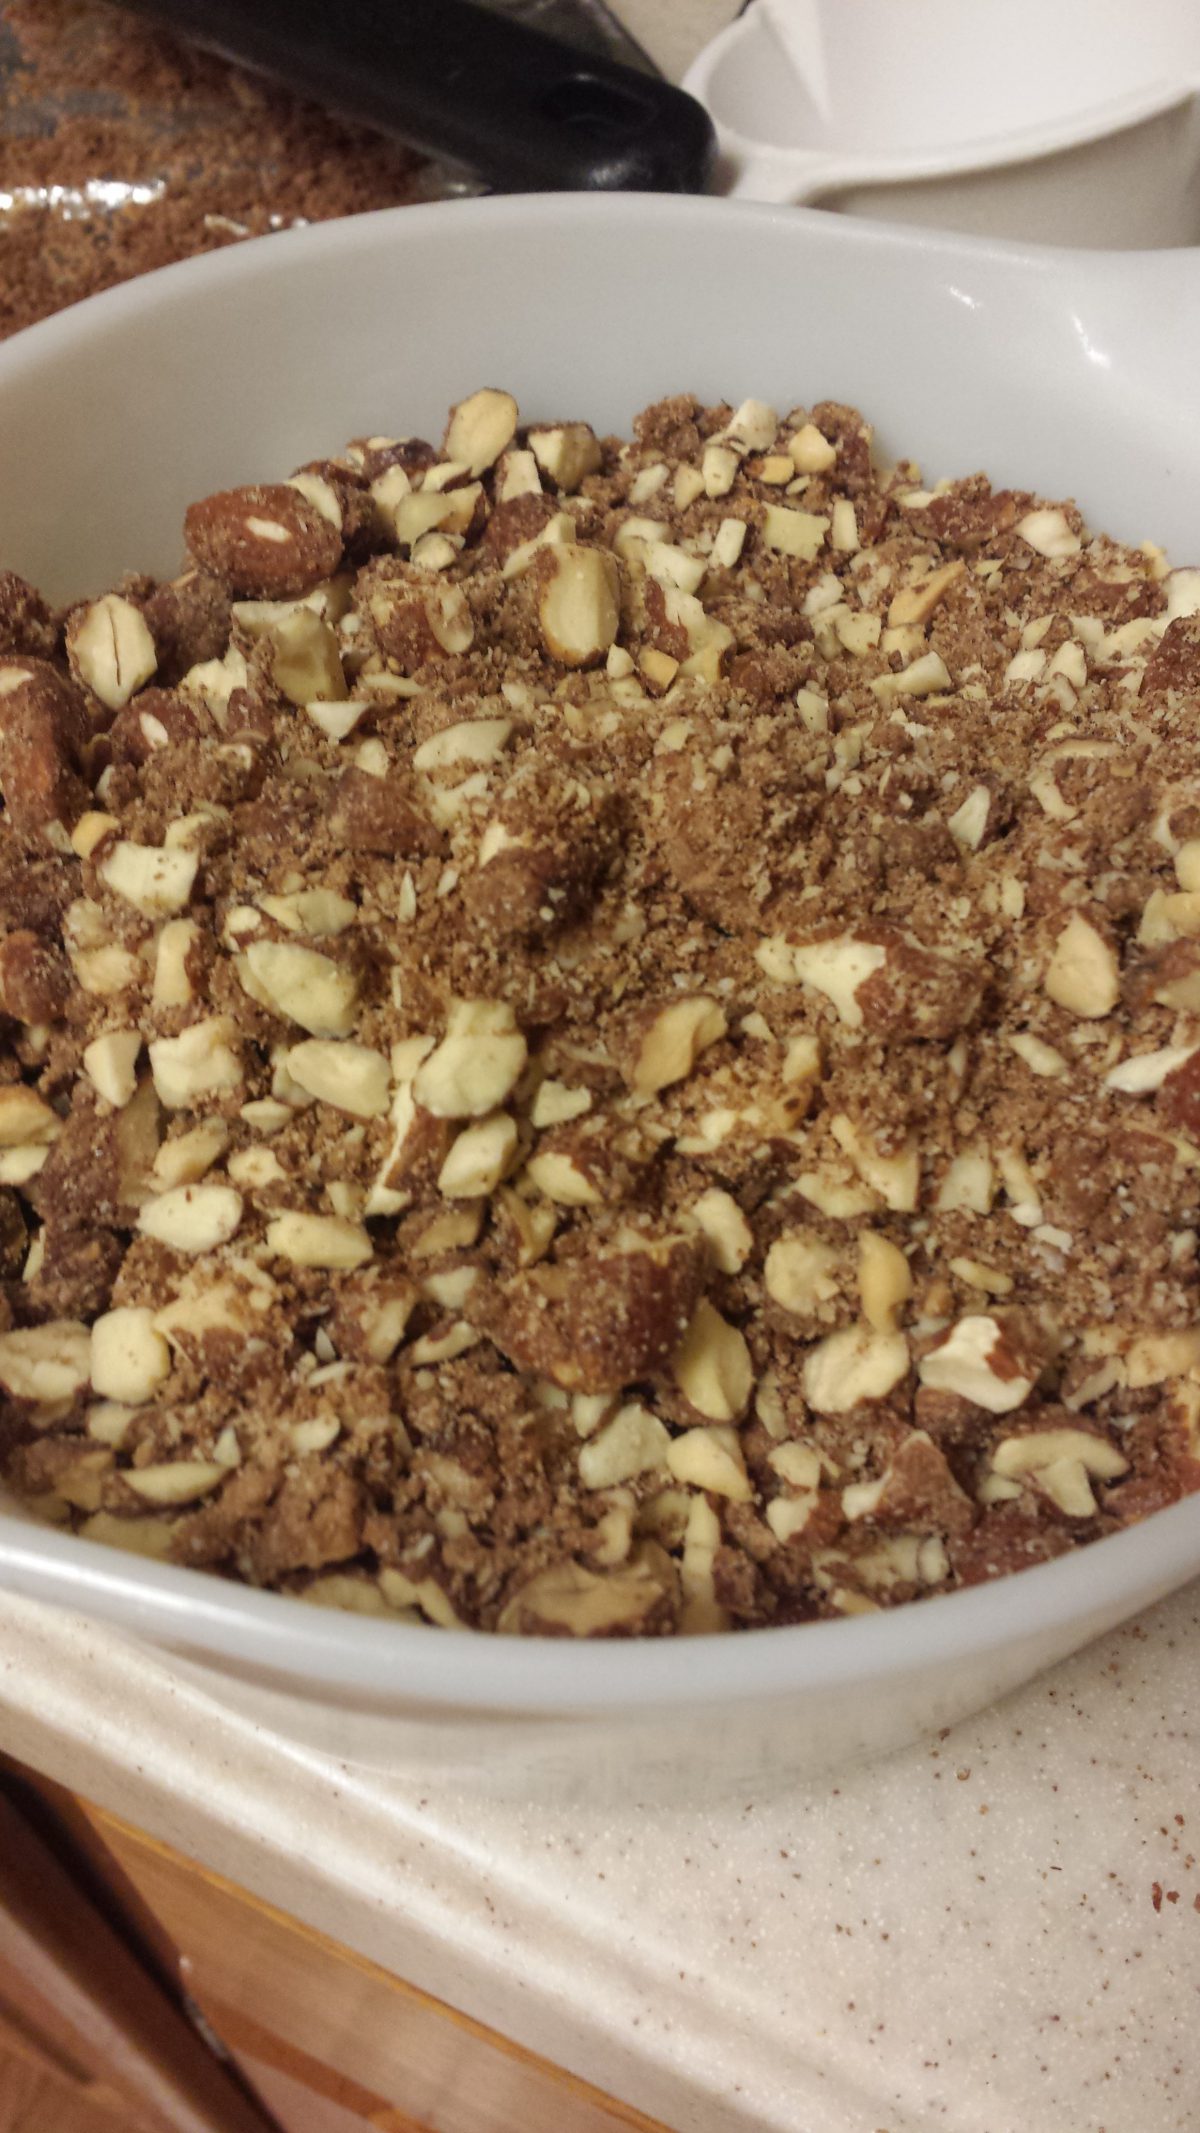 Rough chop of the almonds to stir into cookies.